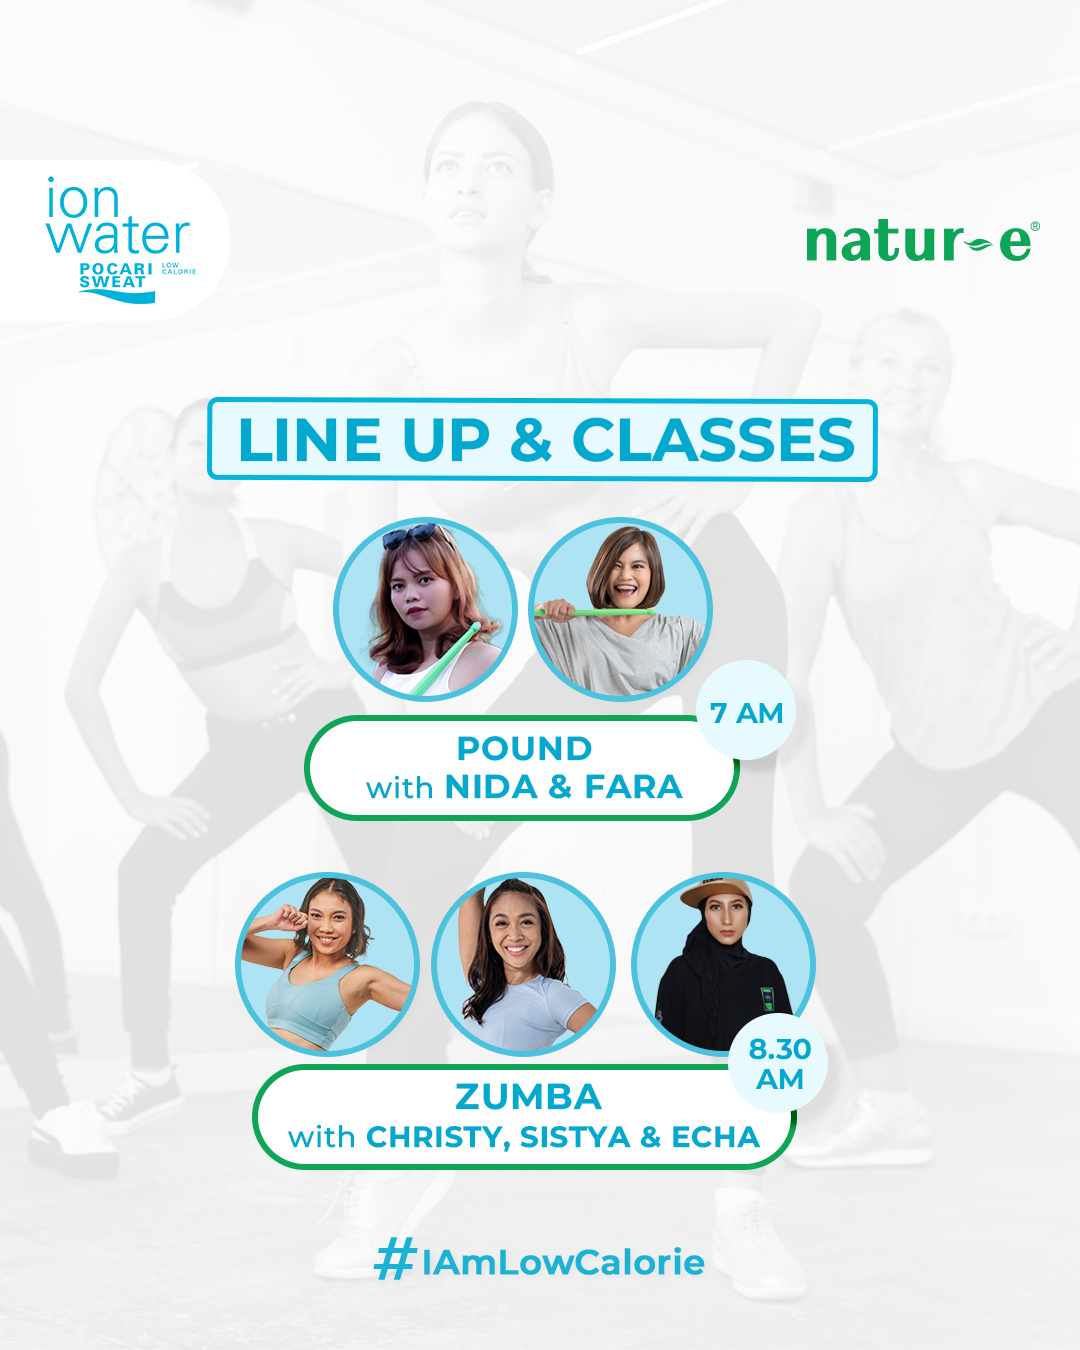 ION WATER Special Workout Class with Natur-E - ZUMBA